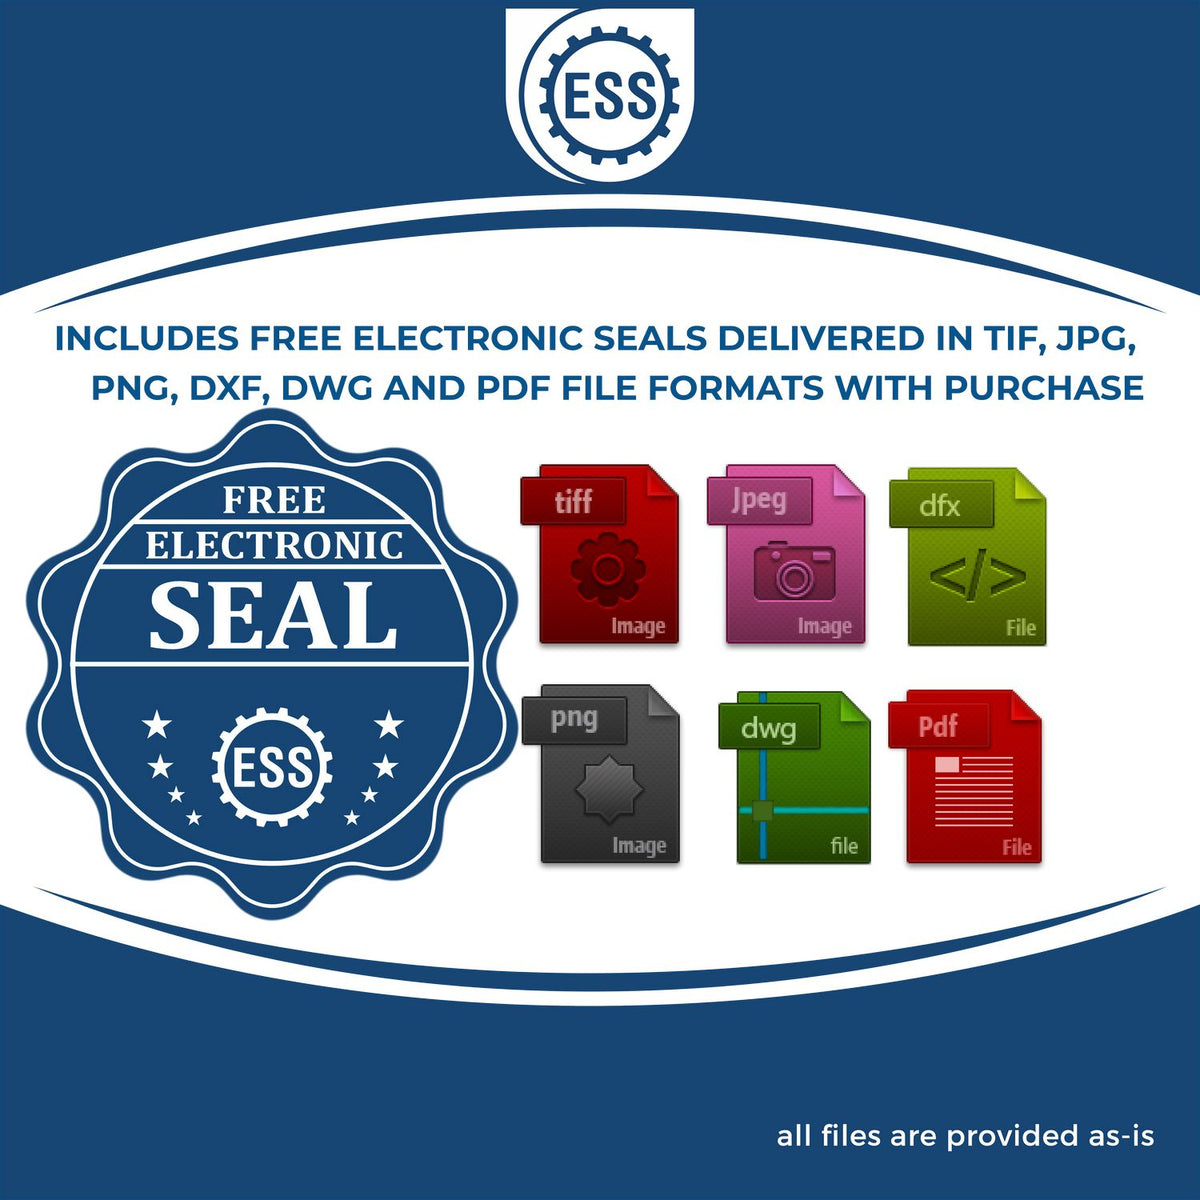 An infographic for the free electronic seal for the Self-Inking State Seal Massachusetts Notary Stamp illustrating the different file type icons such as DXF, DWG, TIF, JPG and PNG.